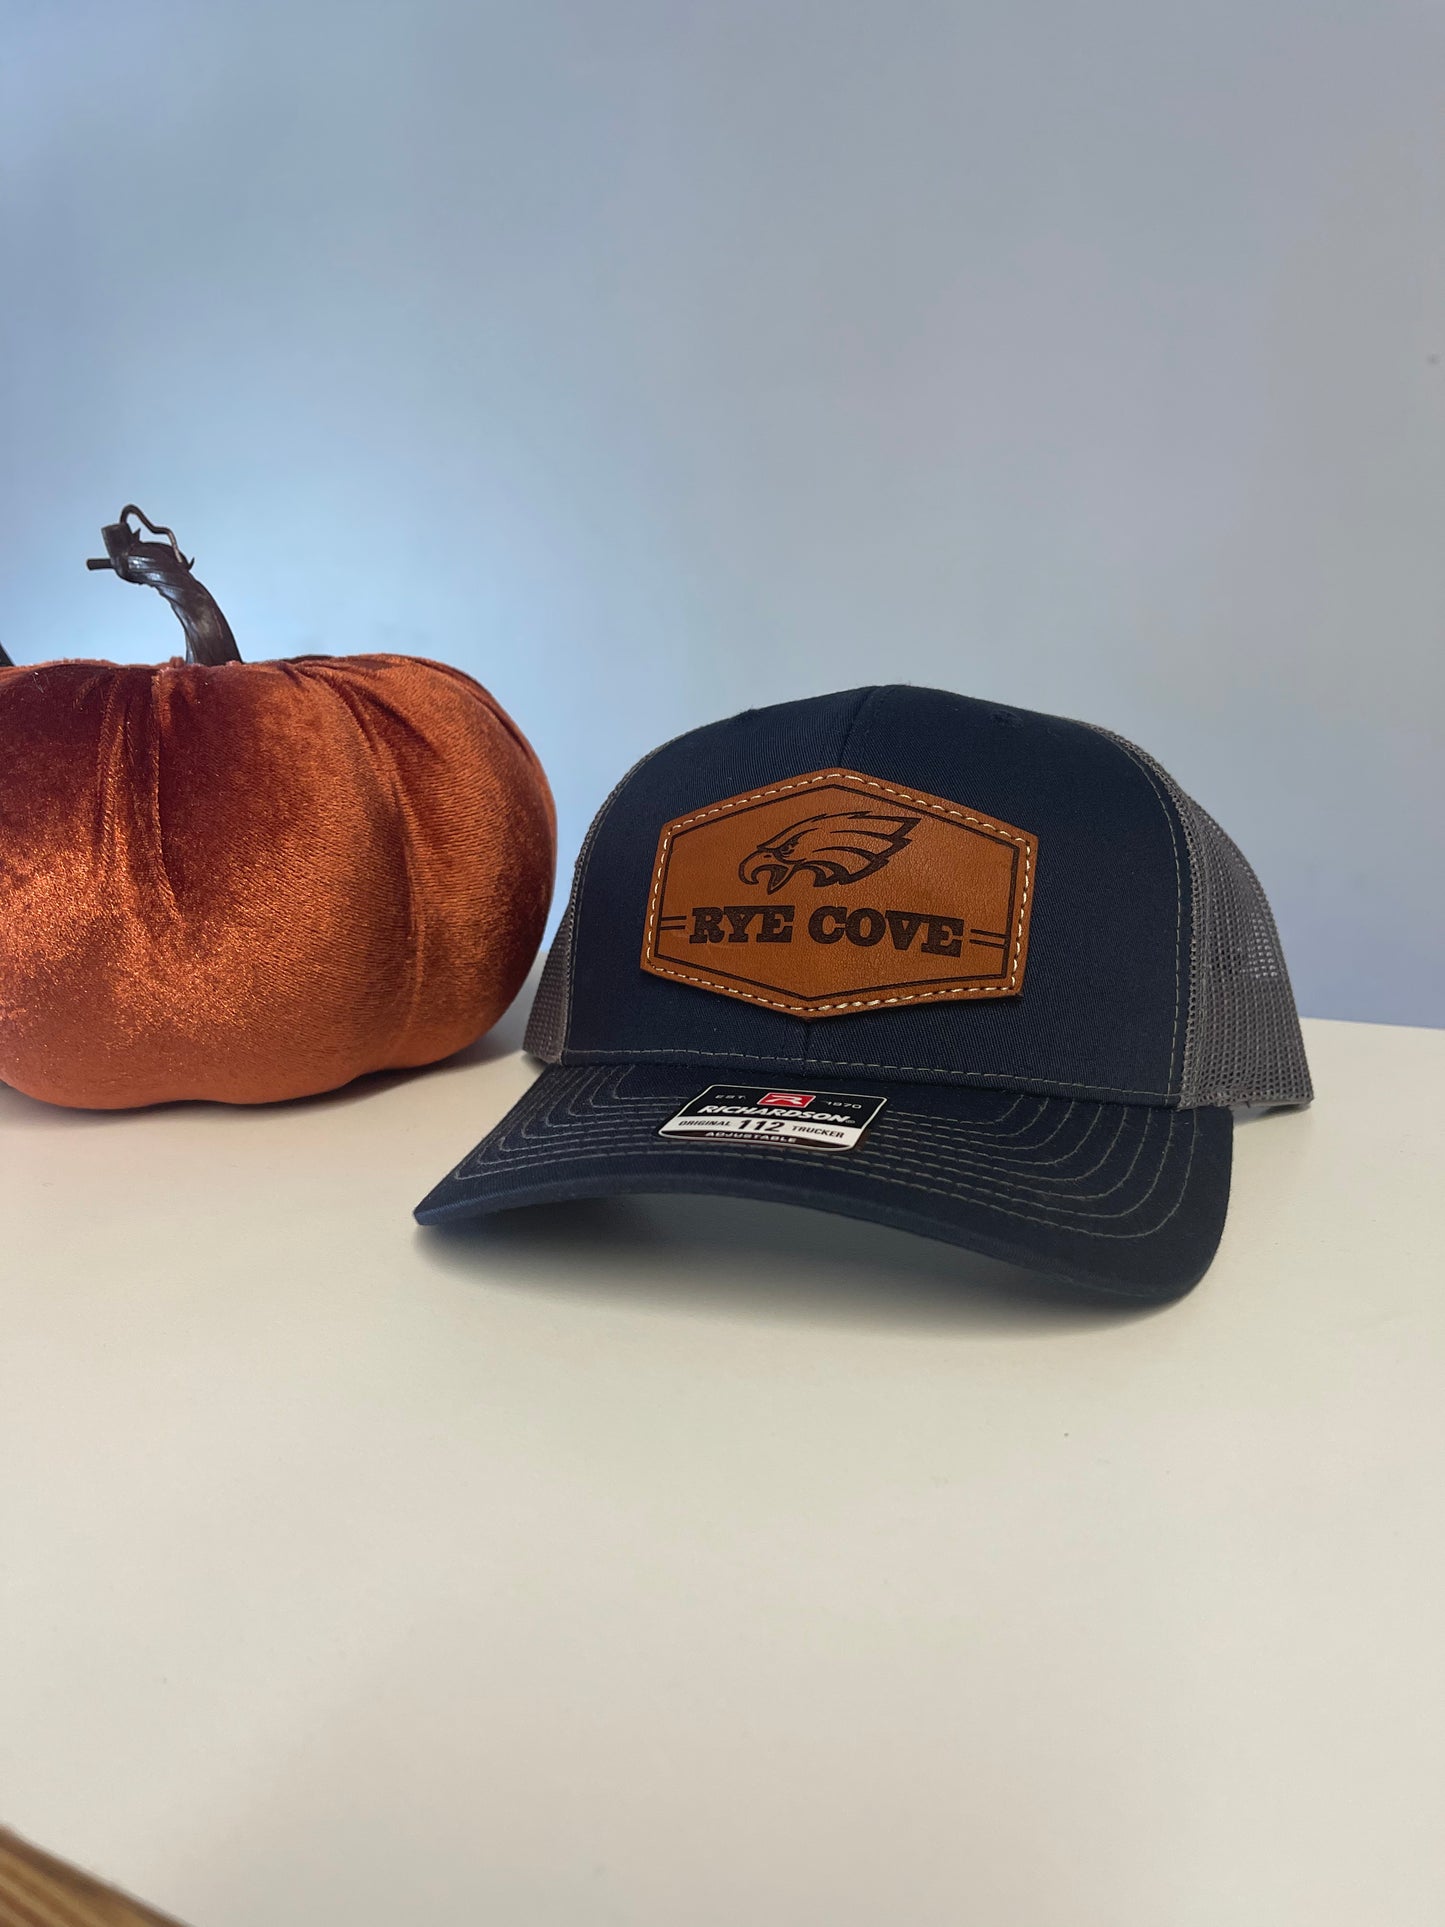 Rye Cove Eagles Custom Leather Patch Hat Special!